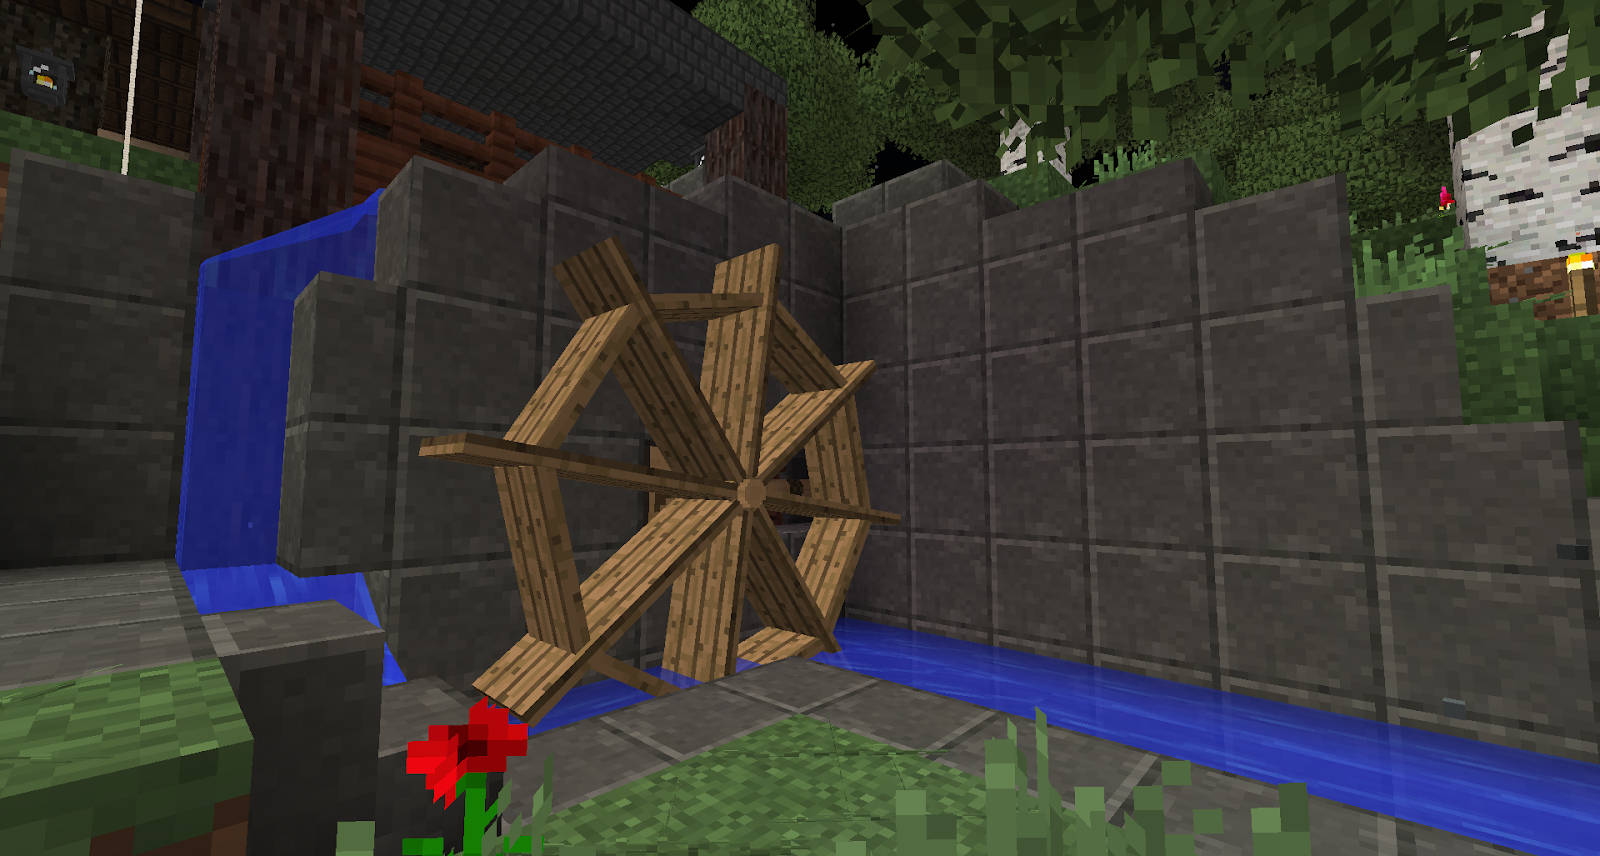 A screenshot showing a wooden watermill being used in the modpack